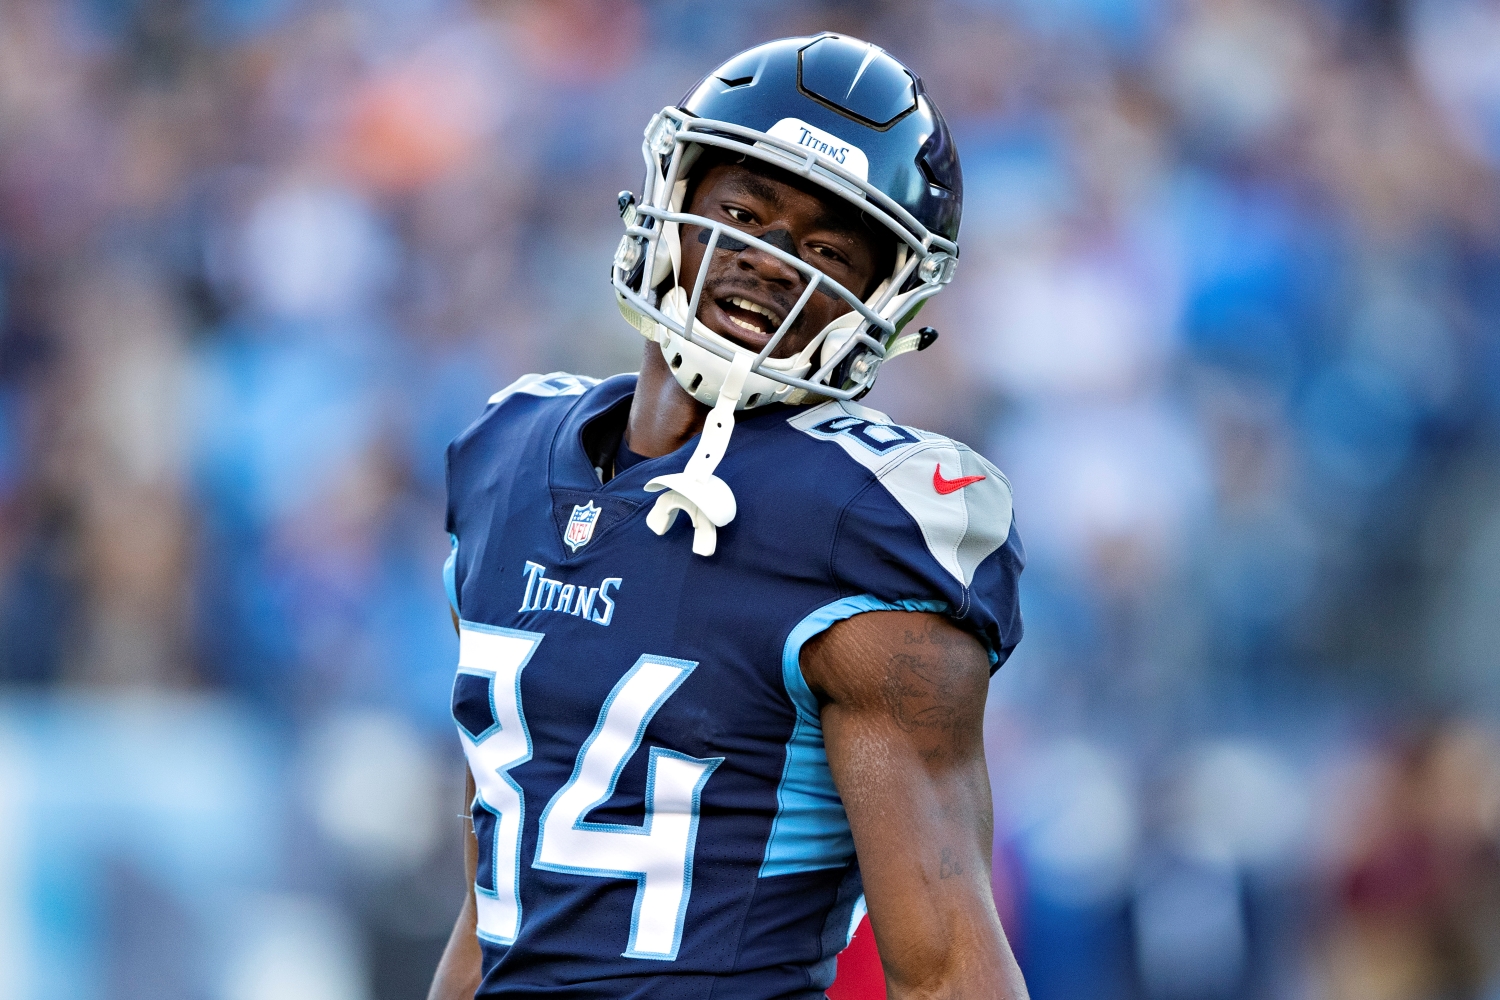 Tennessee Titans receiver Corey Davis looks on during a game.